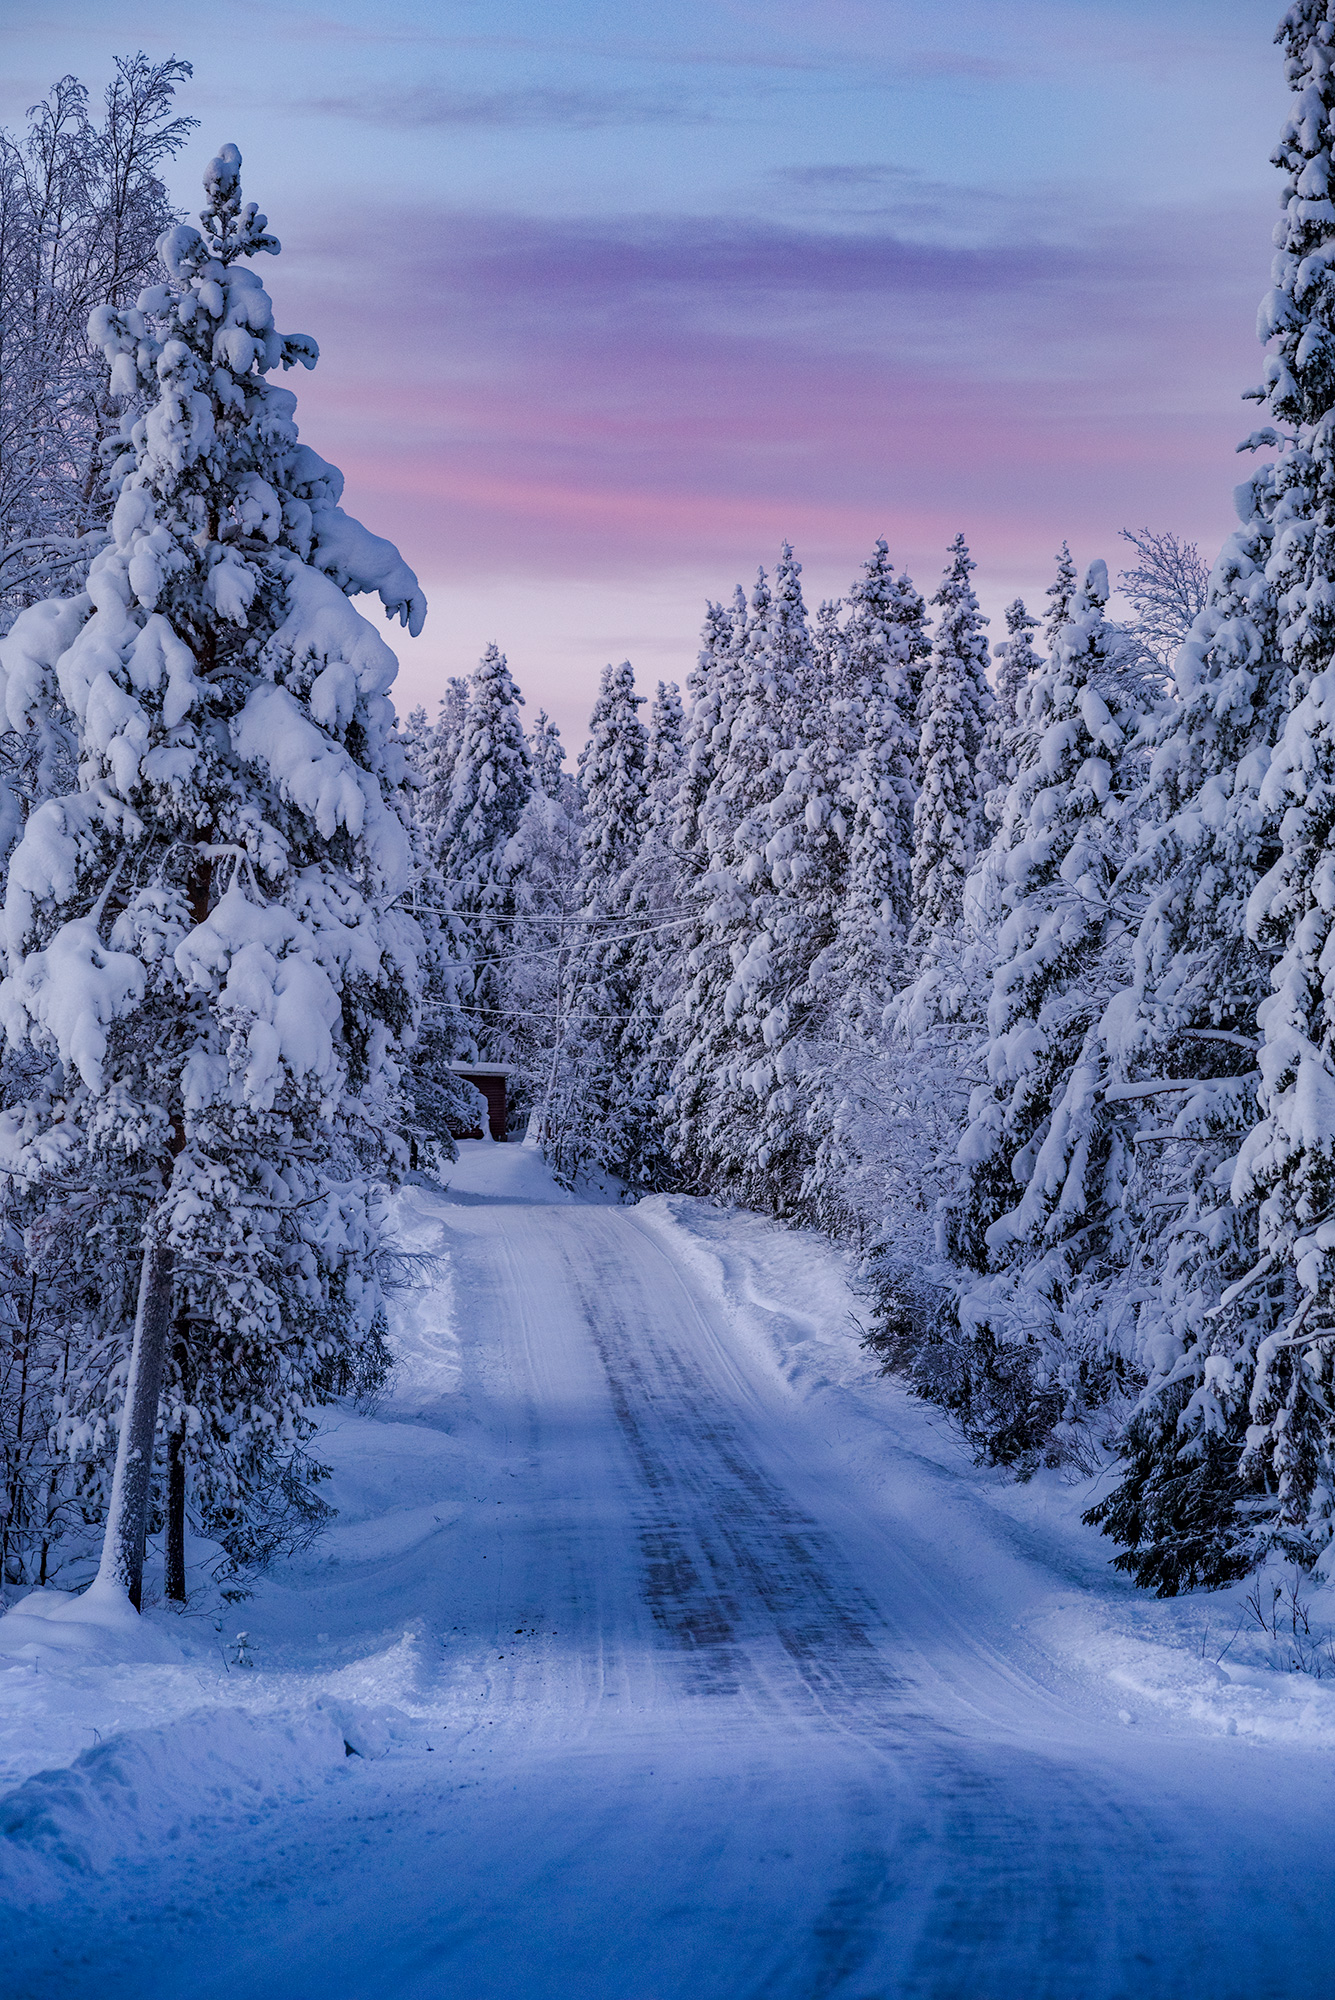 Snow-covered Lapland forest at sunset, photographed by swiss artist Jennifer Esseiva.